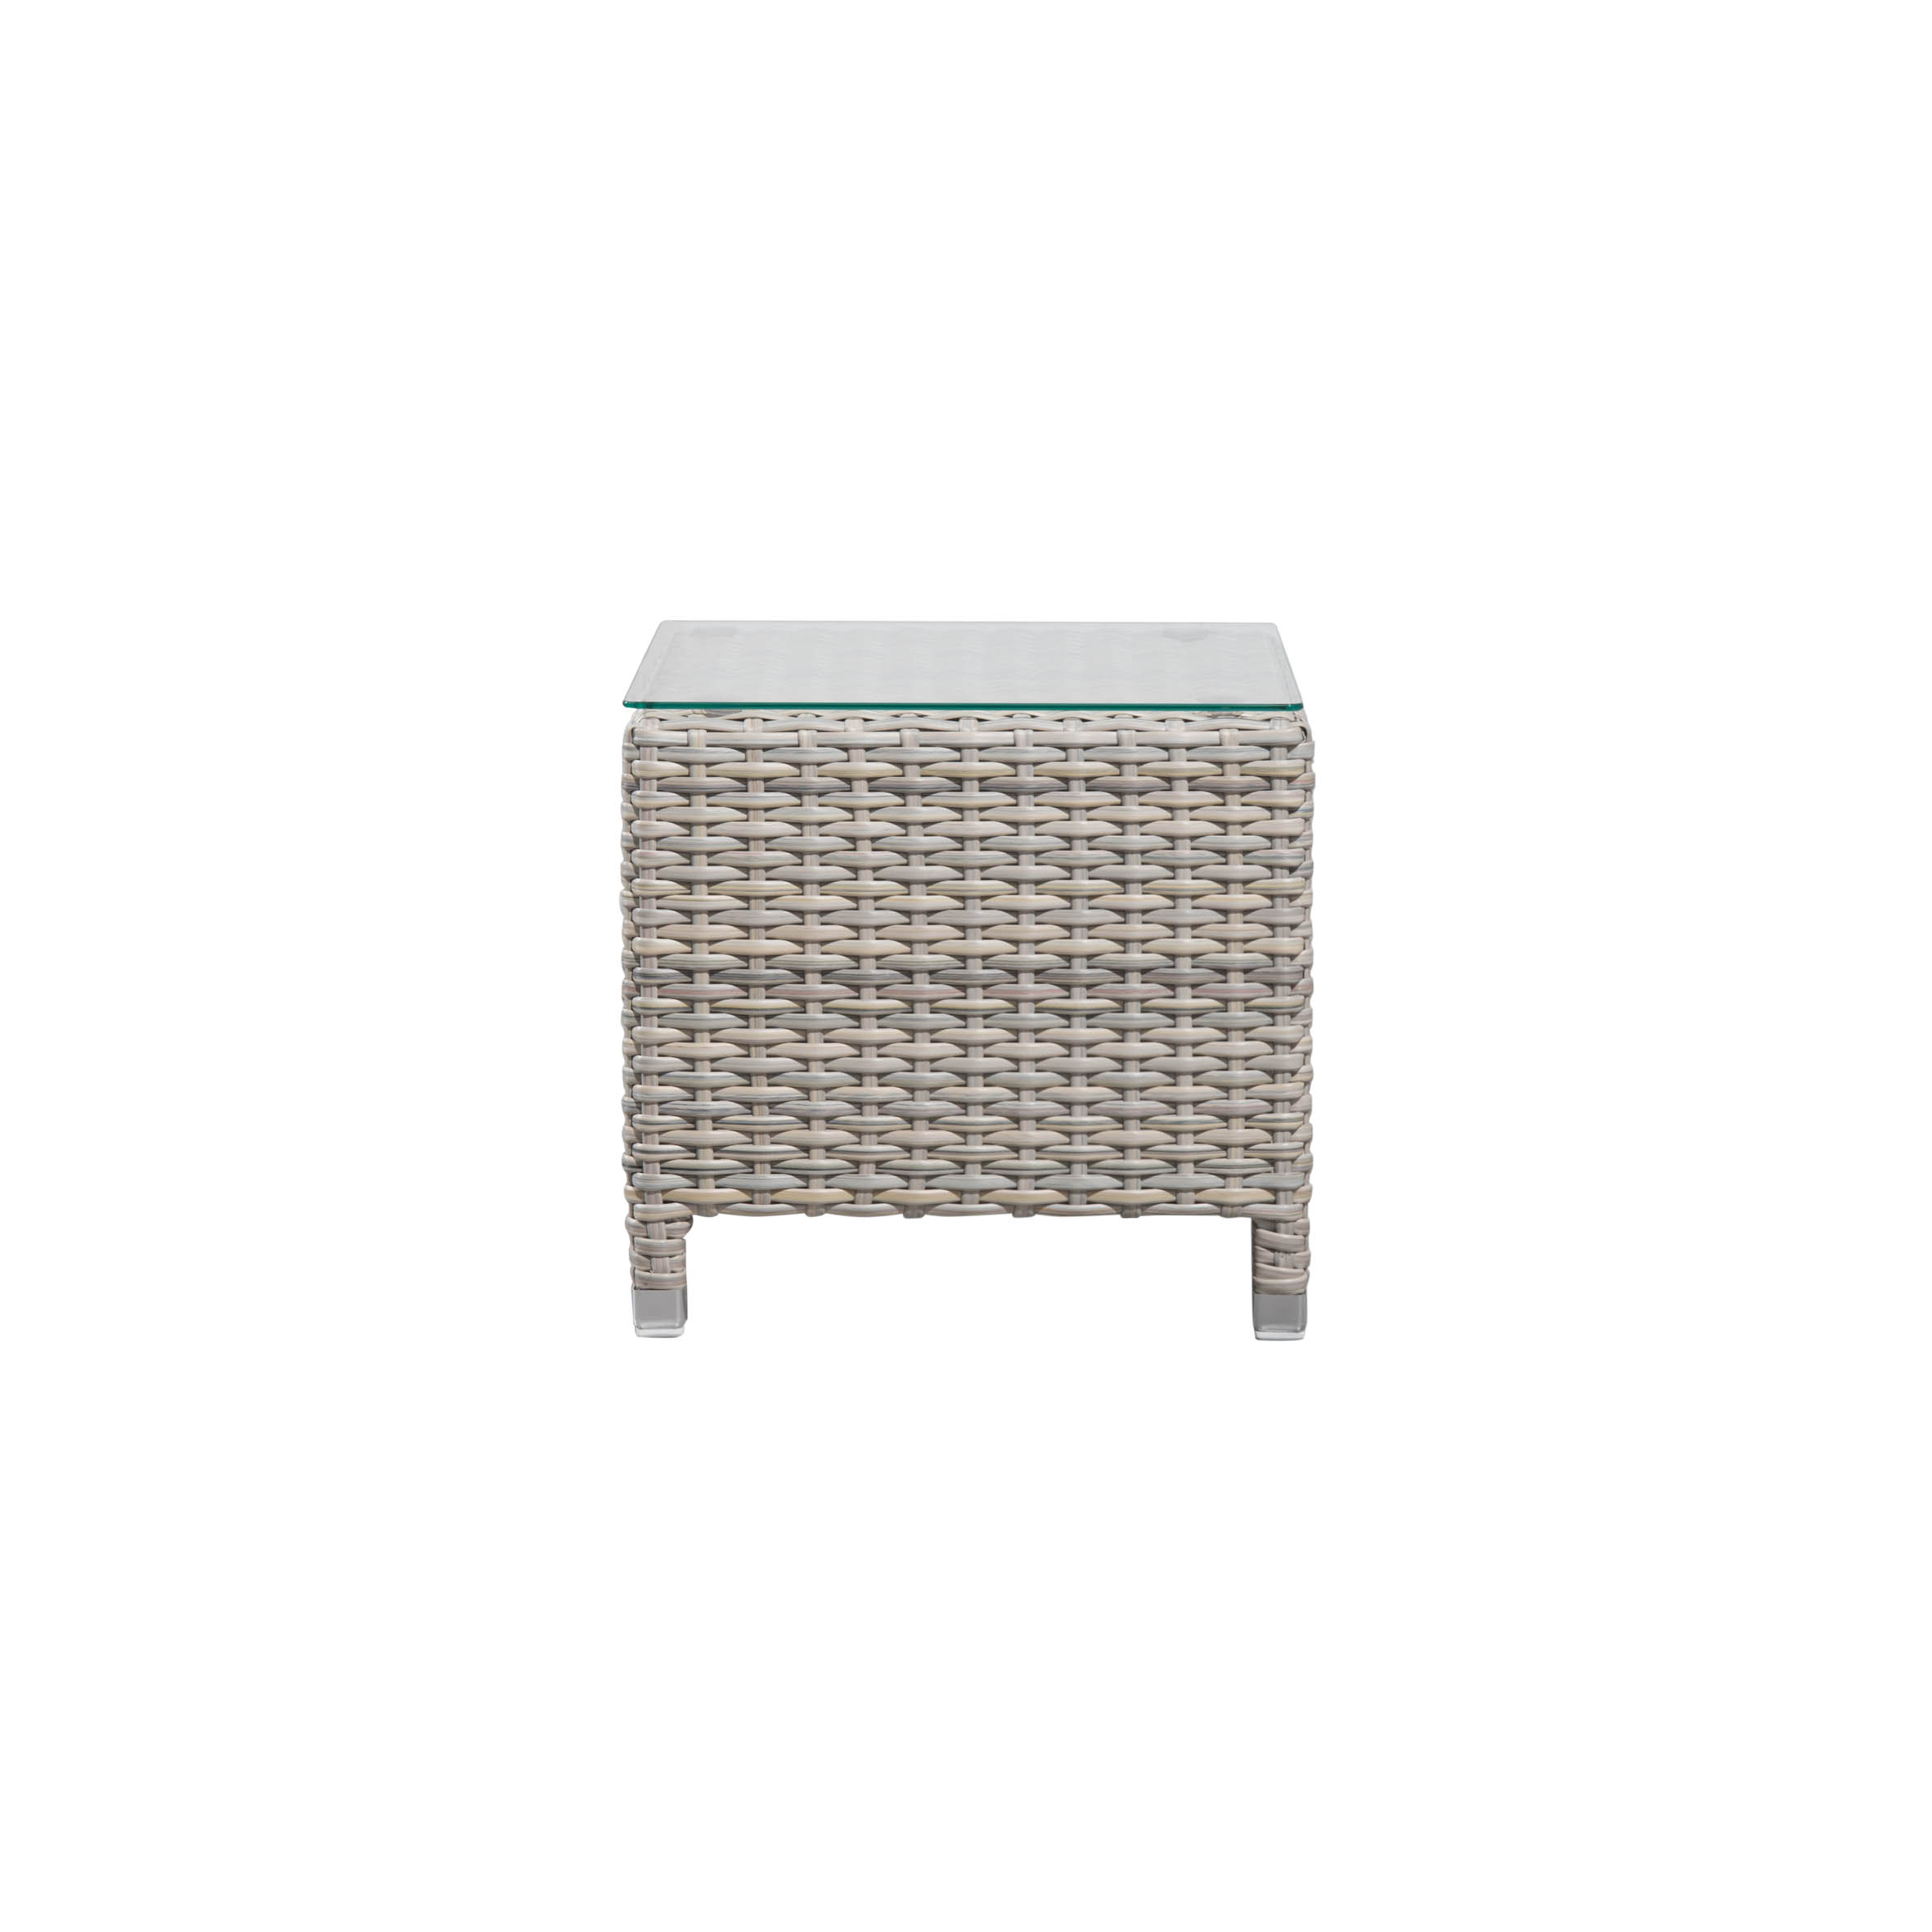 Ideal rattan side table S2